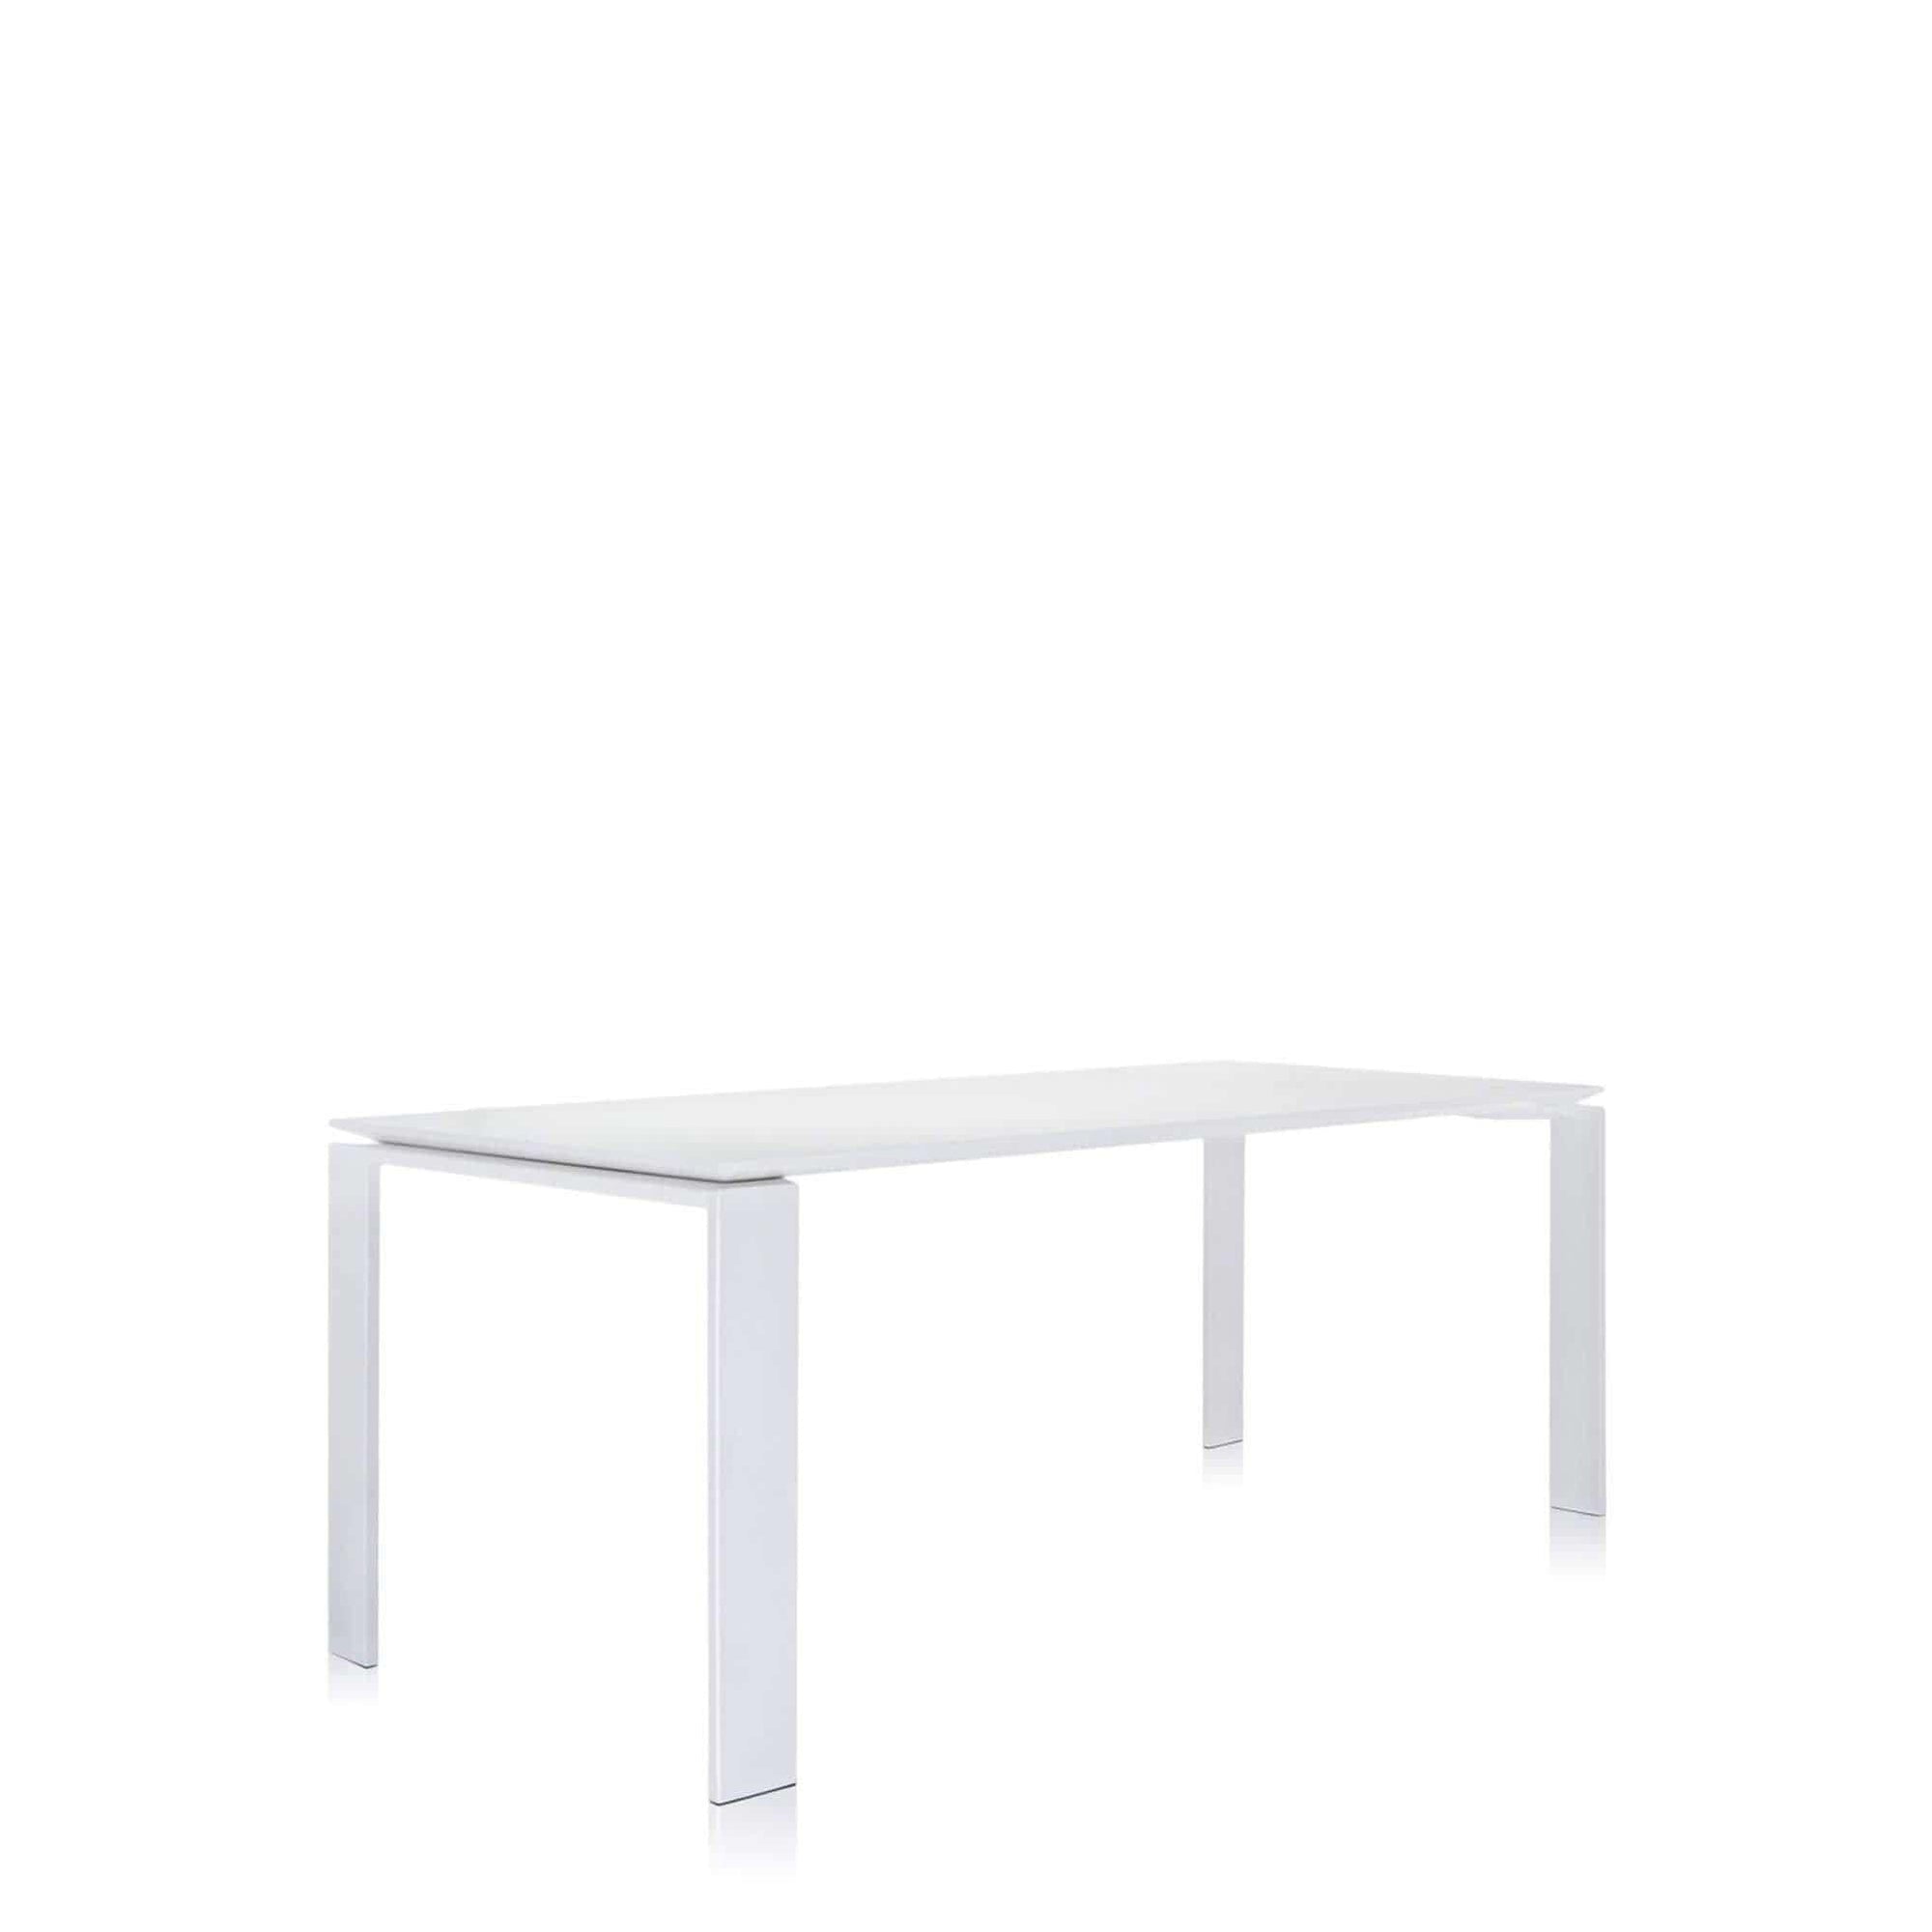 Four 62" Outdoor Rectangular Table - Curated - Furniture - Kartell